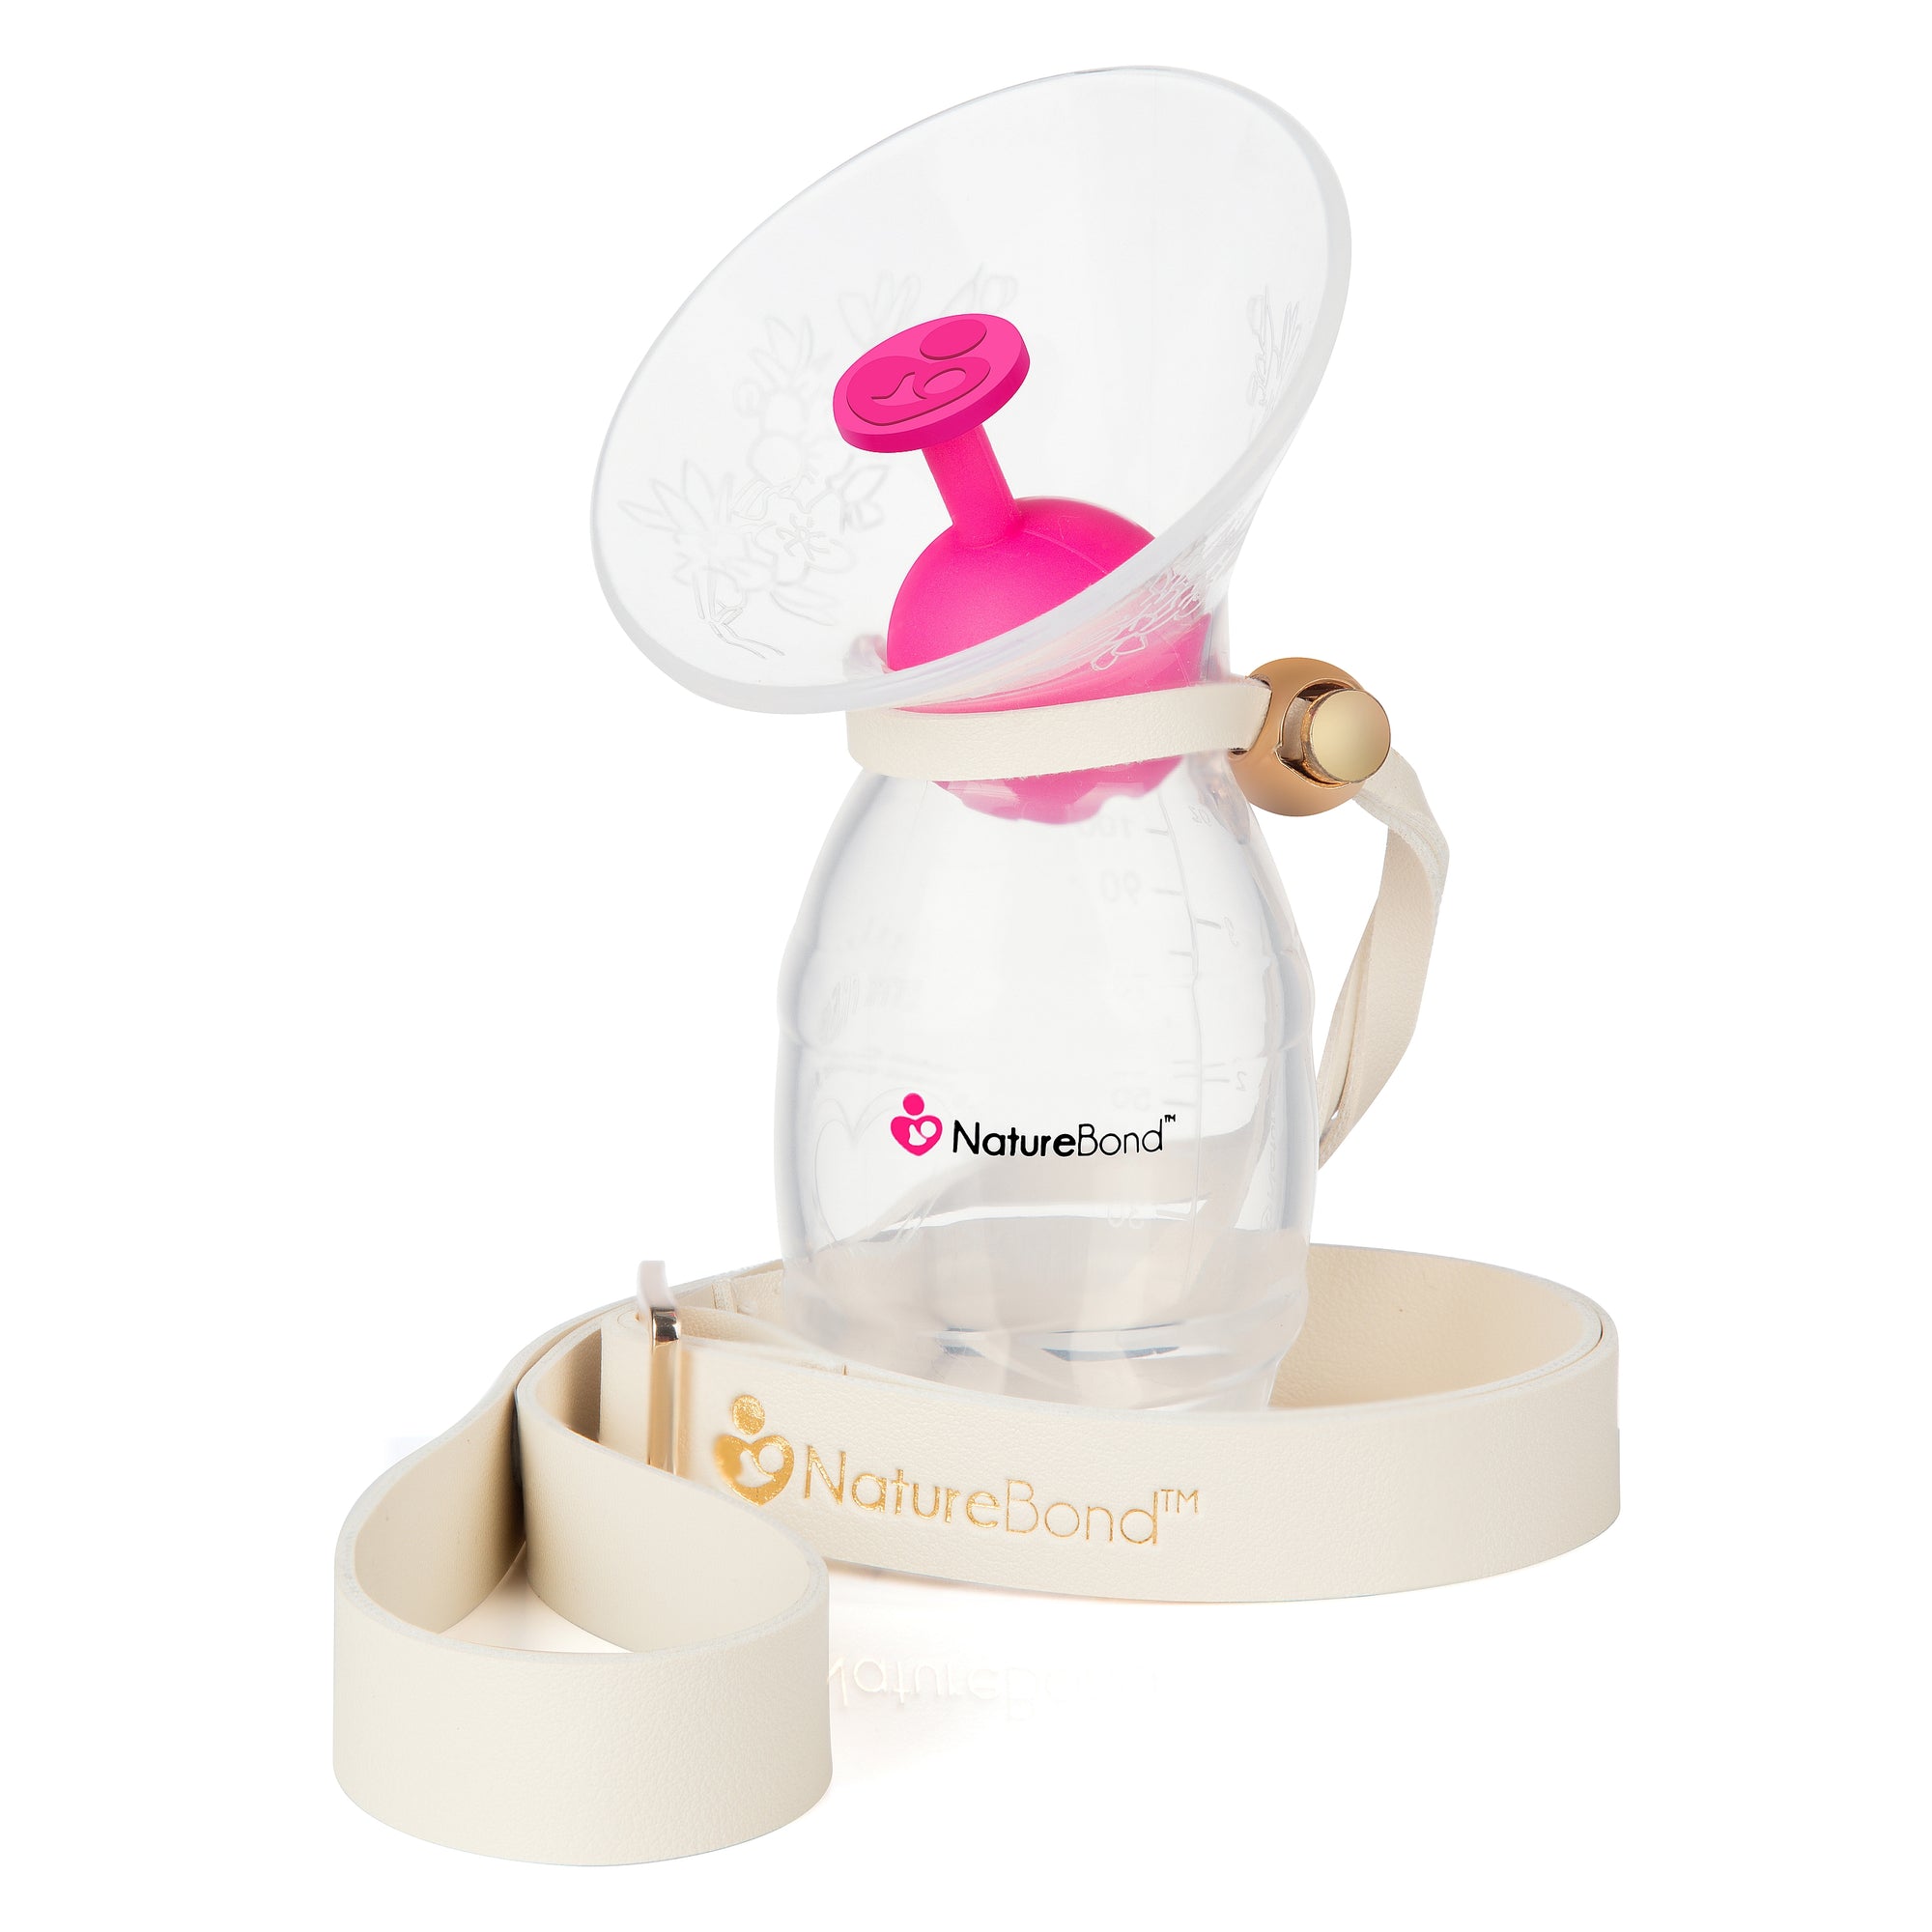 Mommyz Love Breast Shell & Milk Catcher for Breastfeeding Relief - With  PLUGS